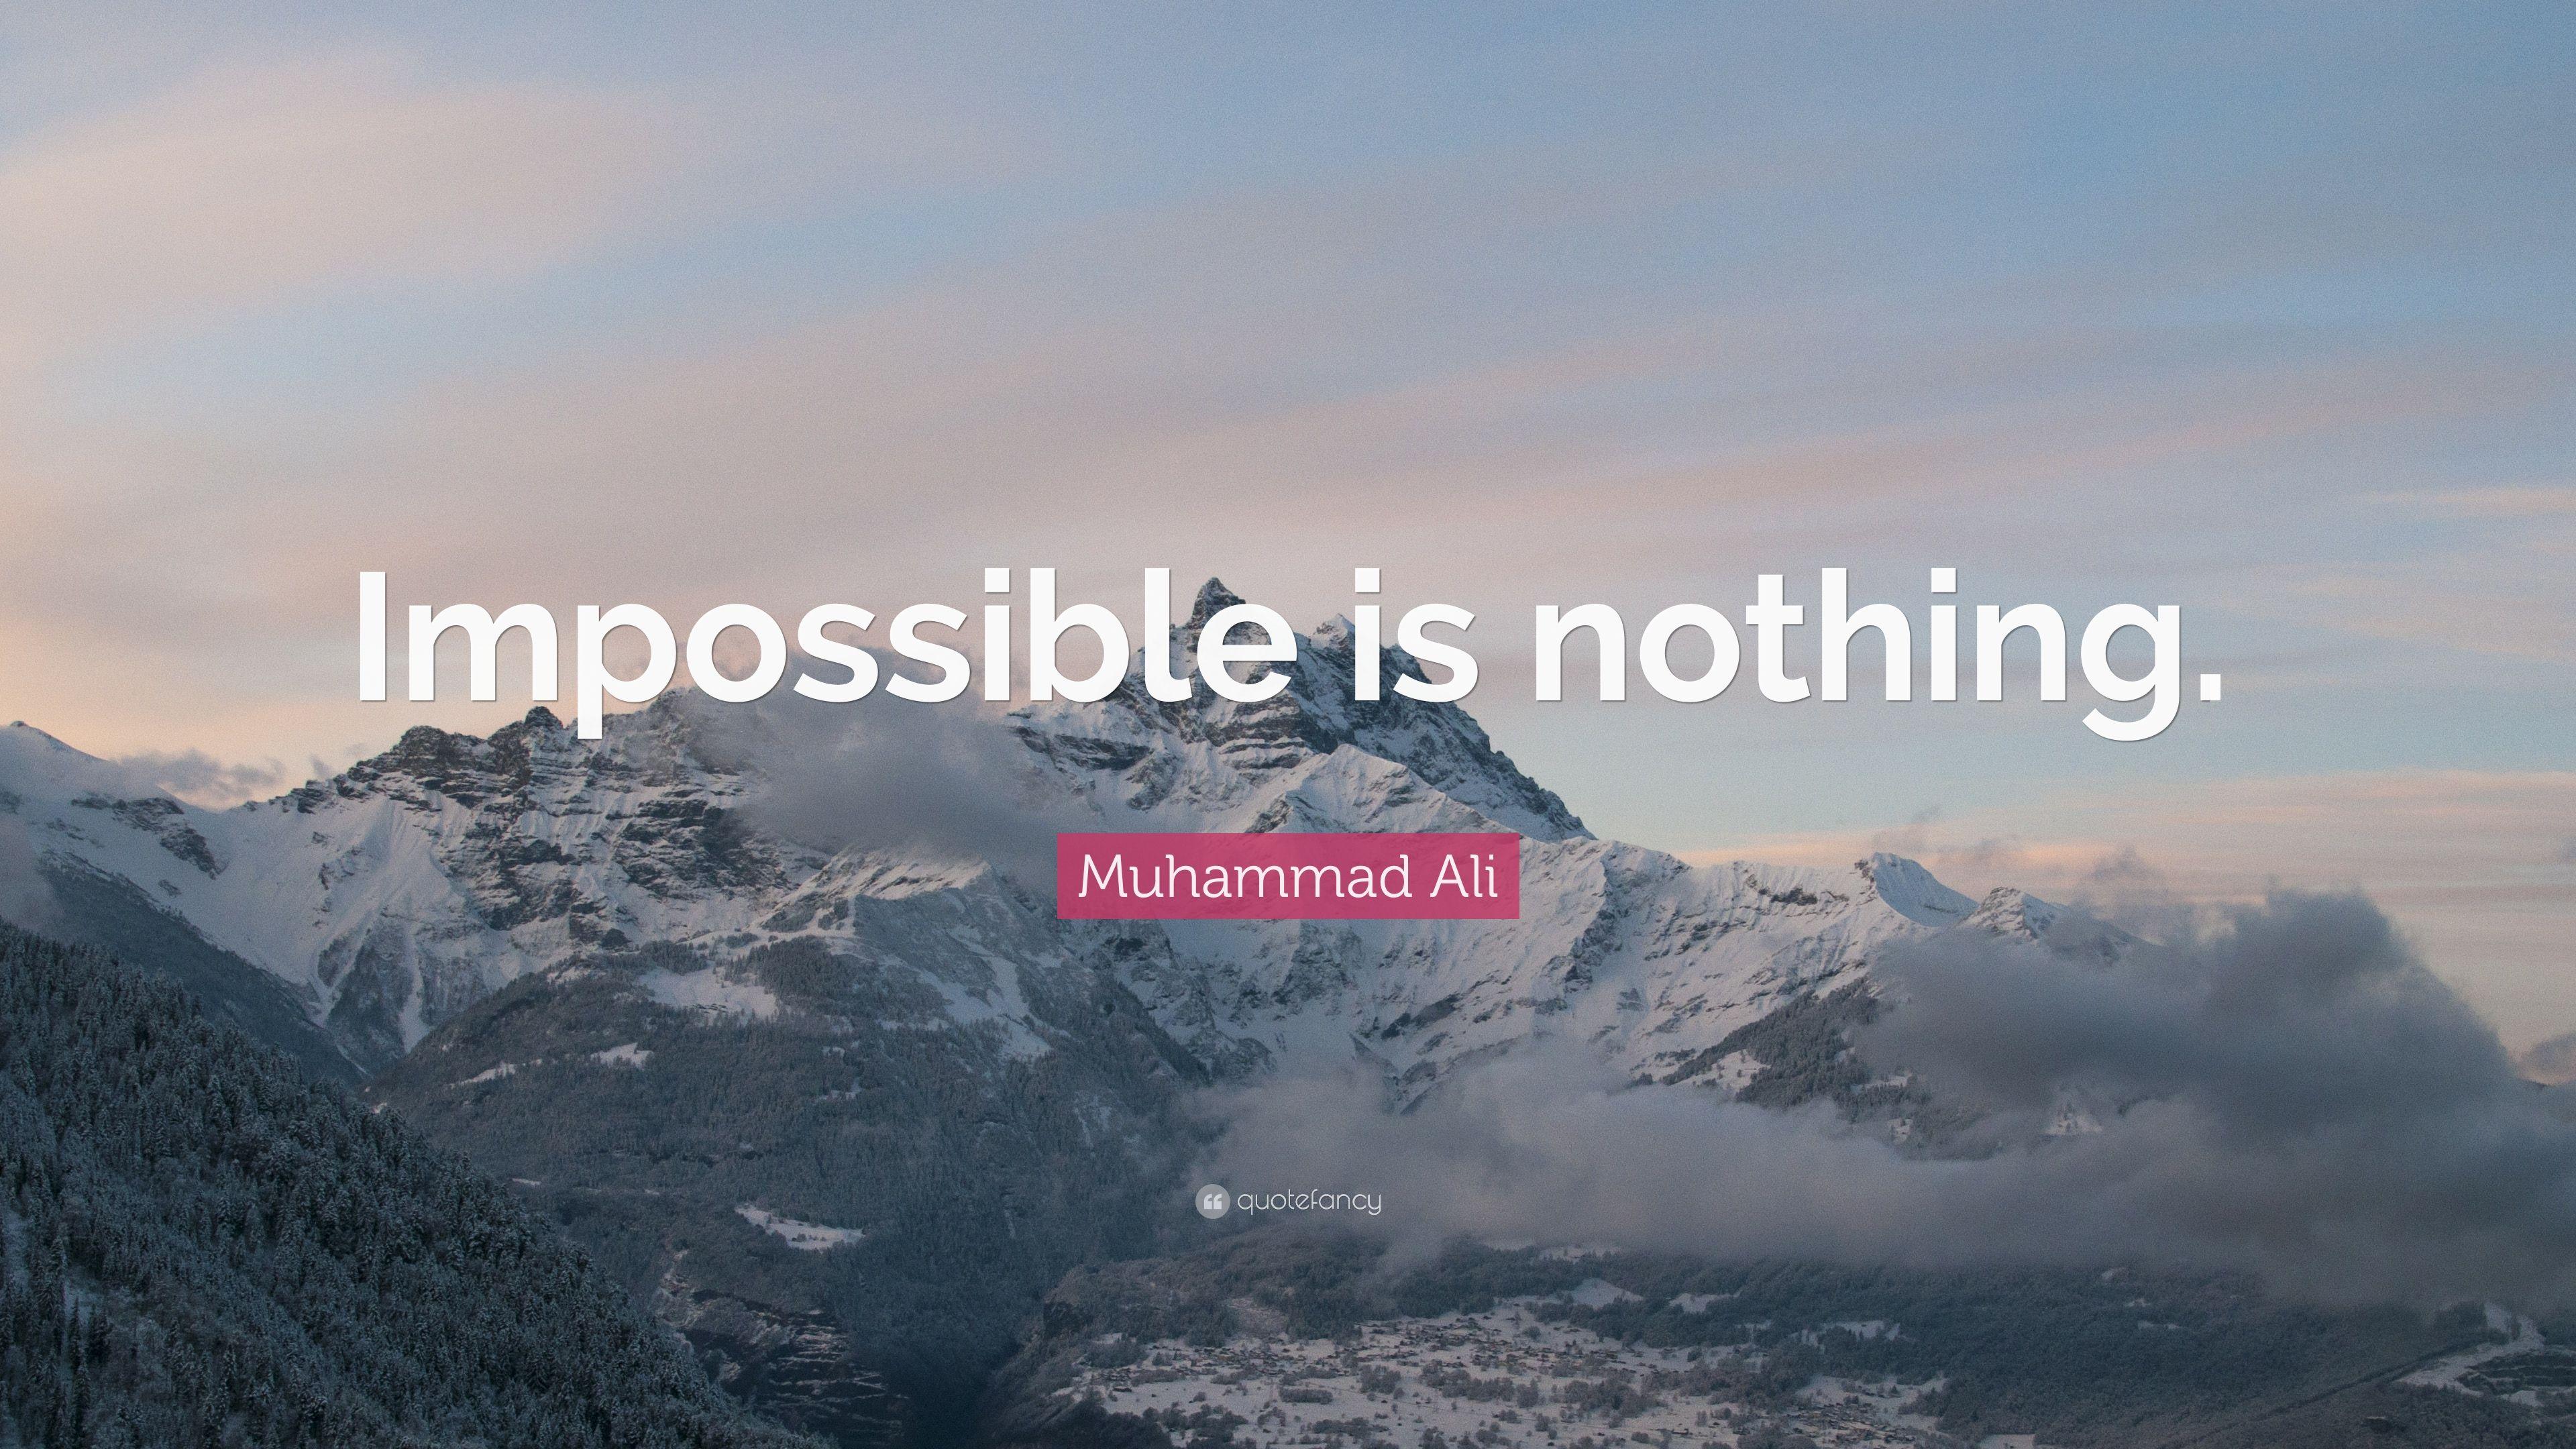 Muhammad Ali Quote: “Impossible is nothing.” 18 wallpaper